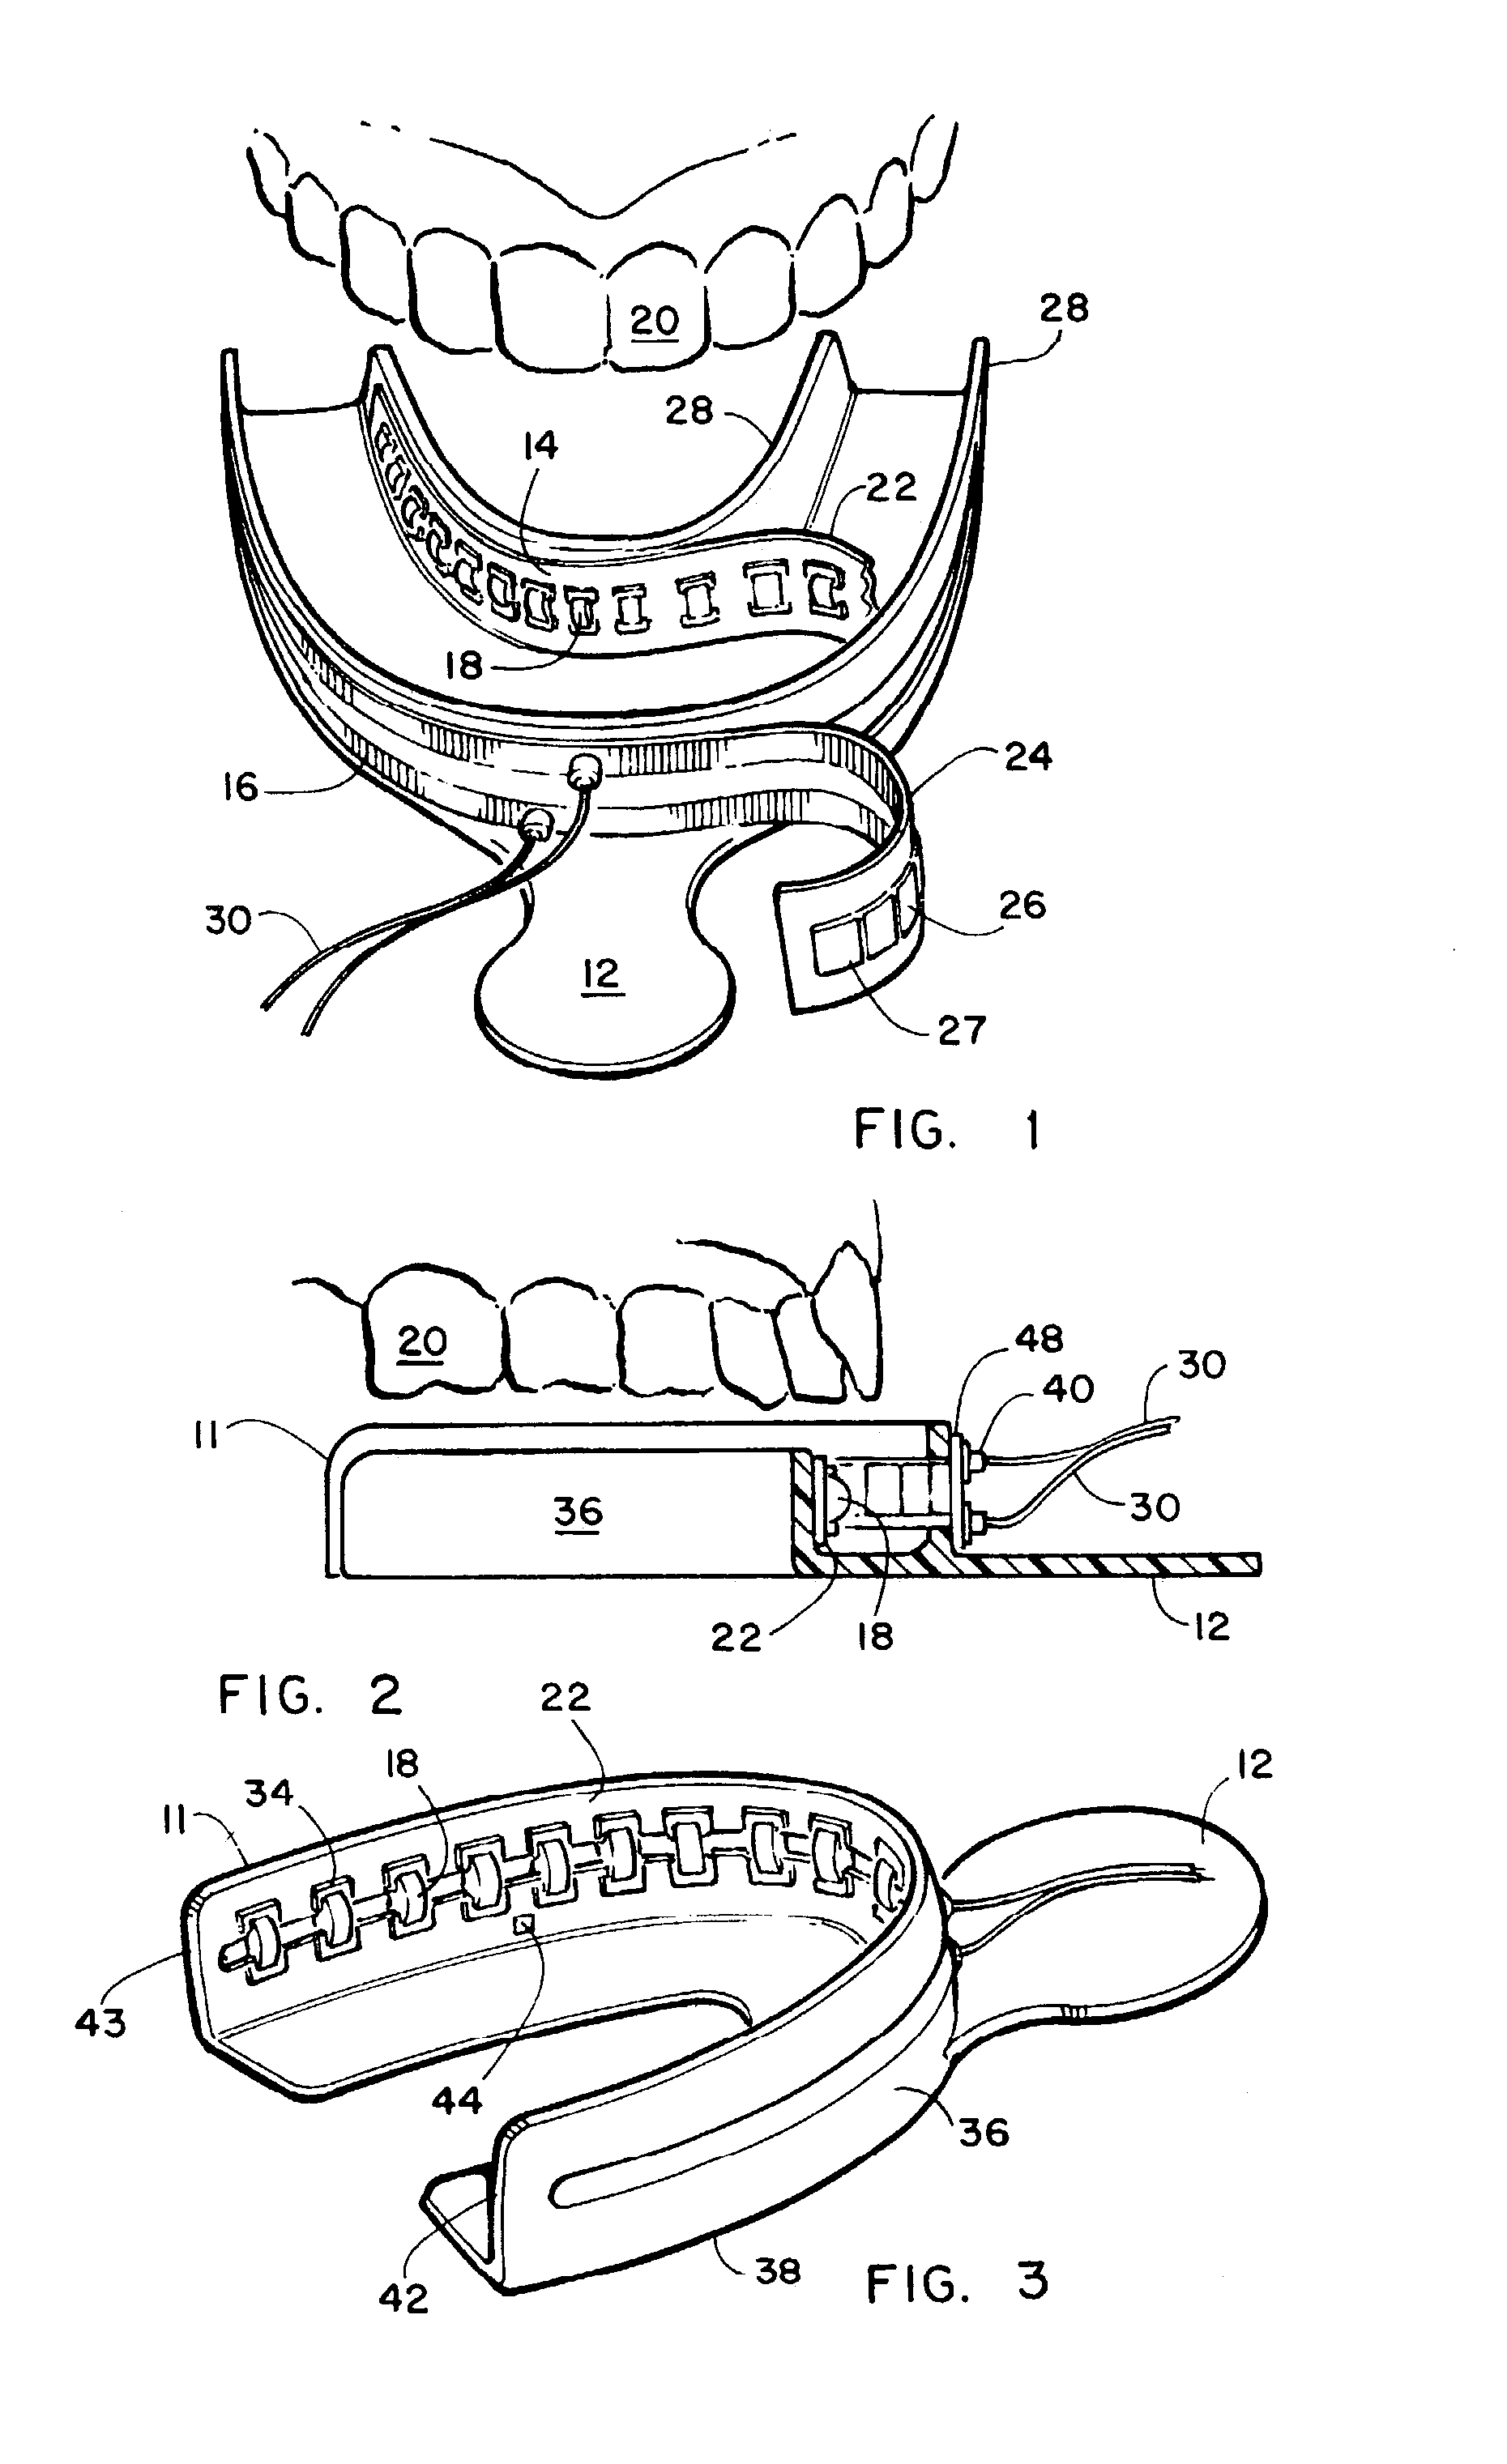 Intra oral dental irradiation device for material curing and dental imaging